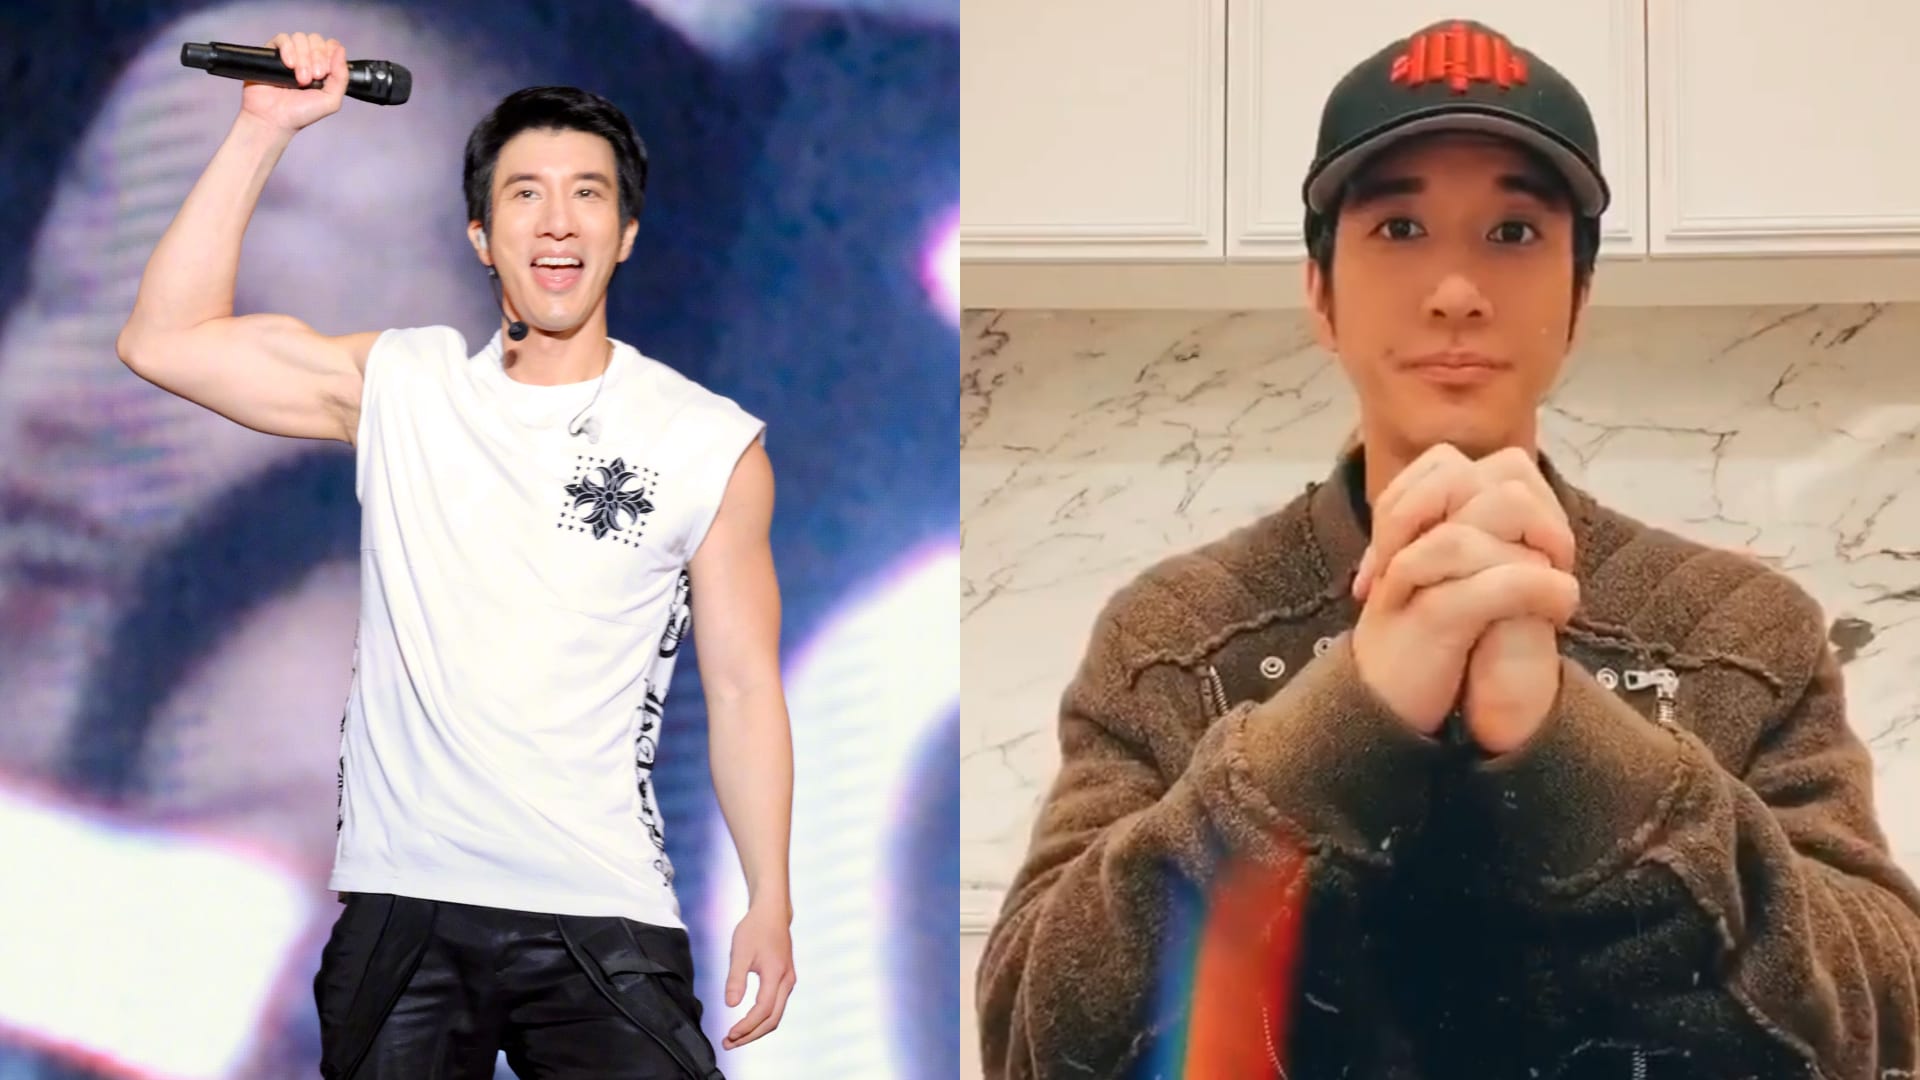 Wang Leehom Has Been Under Self-Quarantine For Two Months After Getting A Fever Following Two Concerts In Wuhan Last December